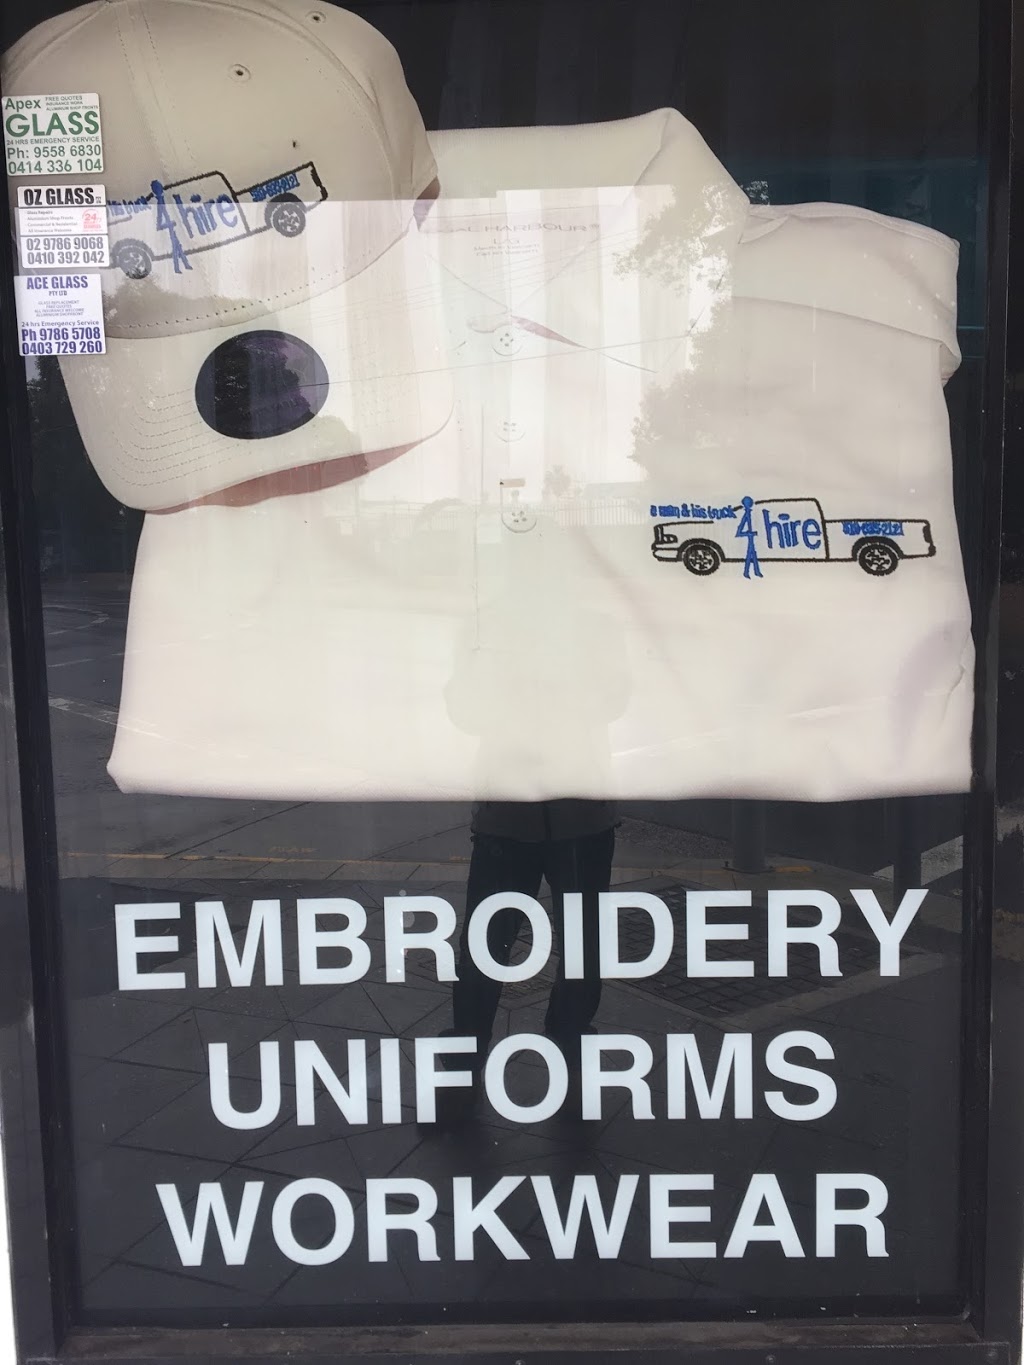 Catalyst Embroidery | 158-162 Georges River Rd, Croydon Park NSW 2133, Australia | Phone: 0401 495 085